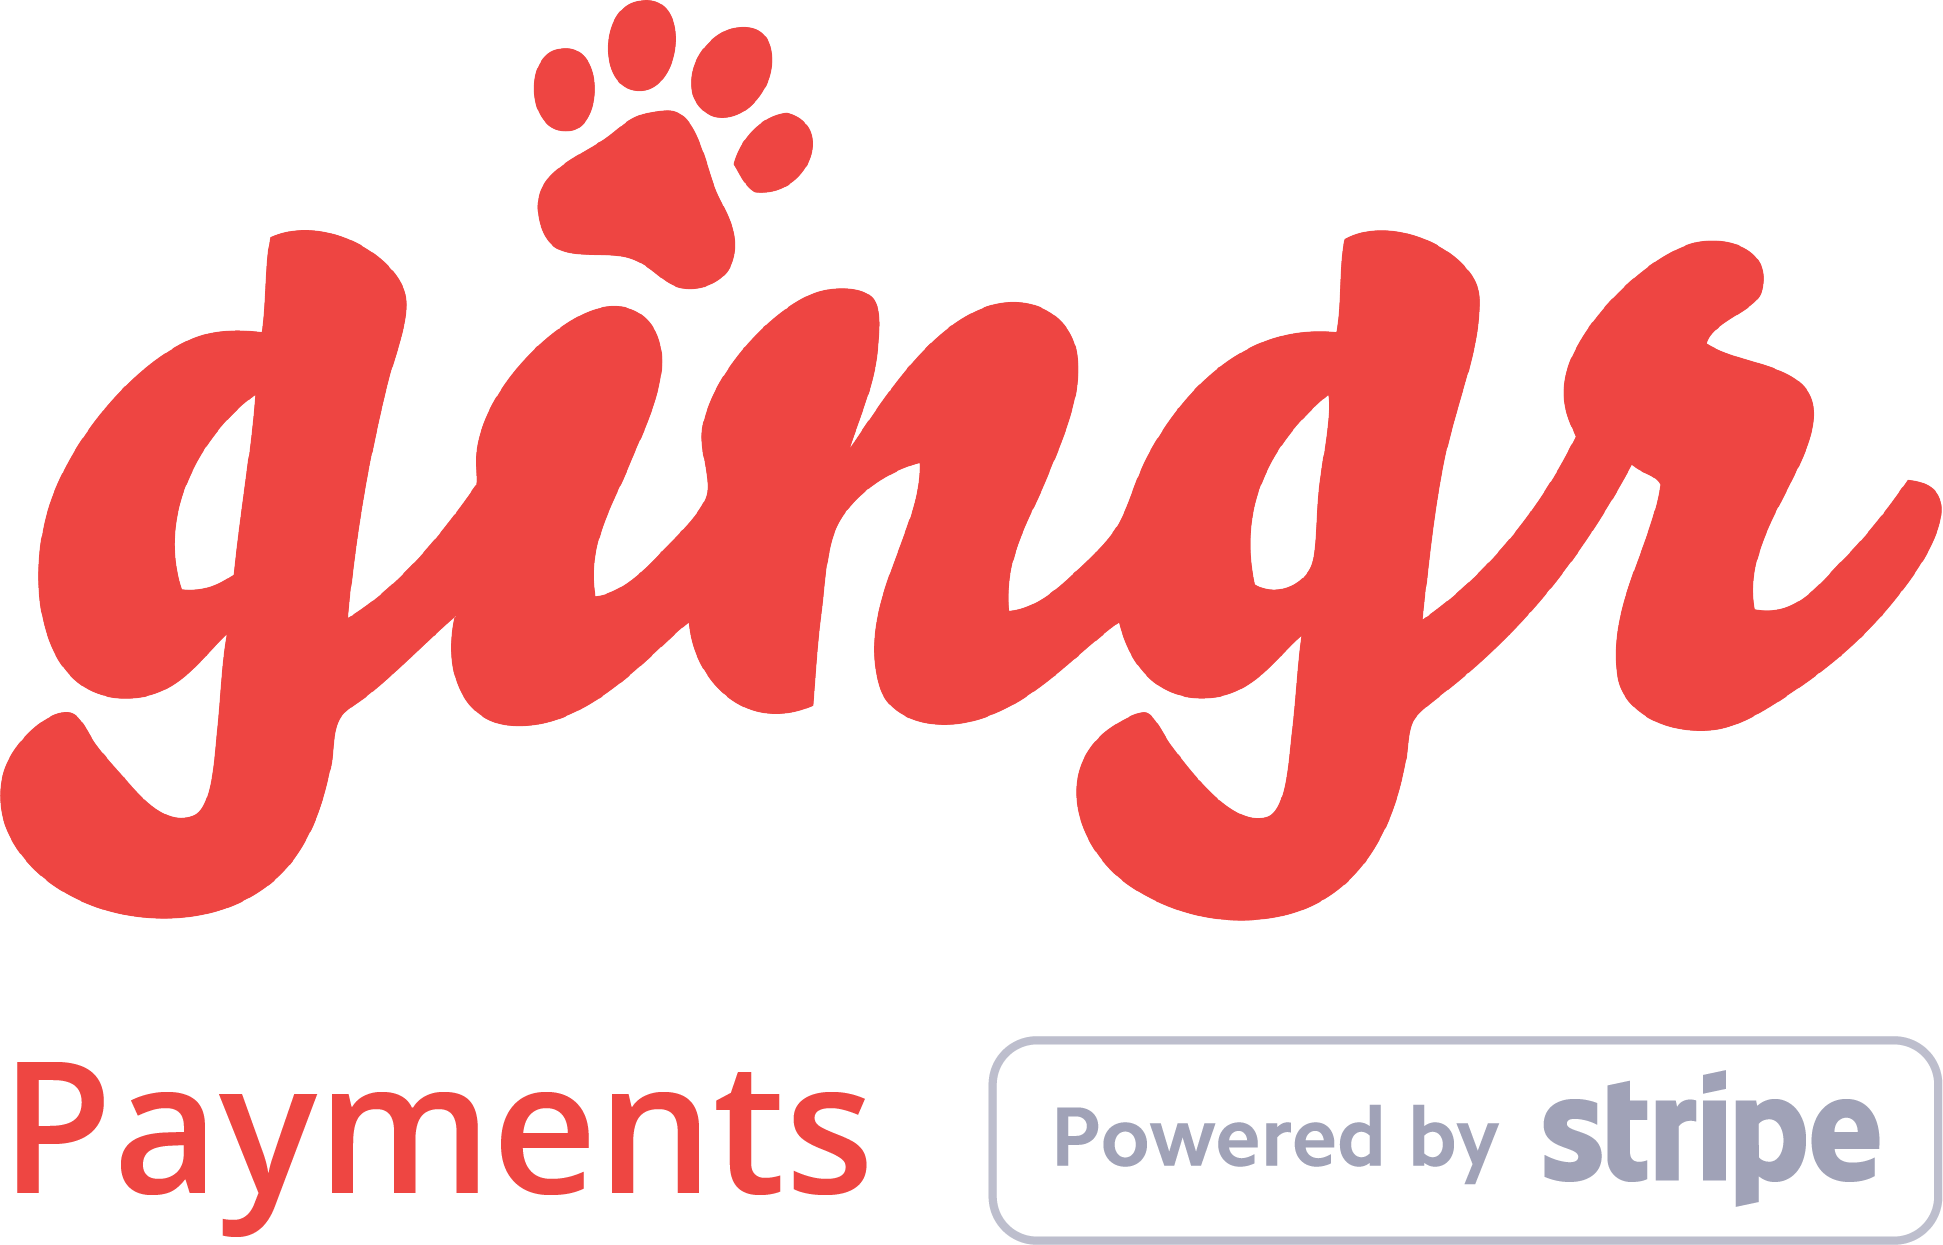 Gingr_Payments_Powered_by_Stripe.png